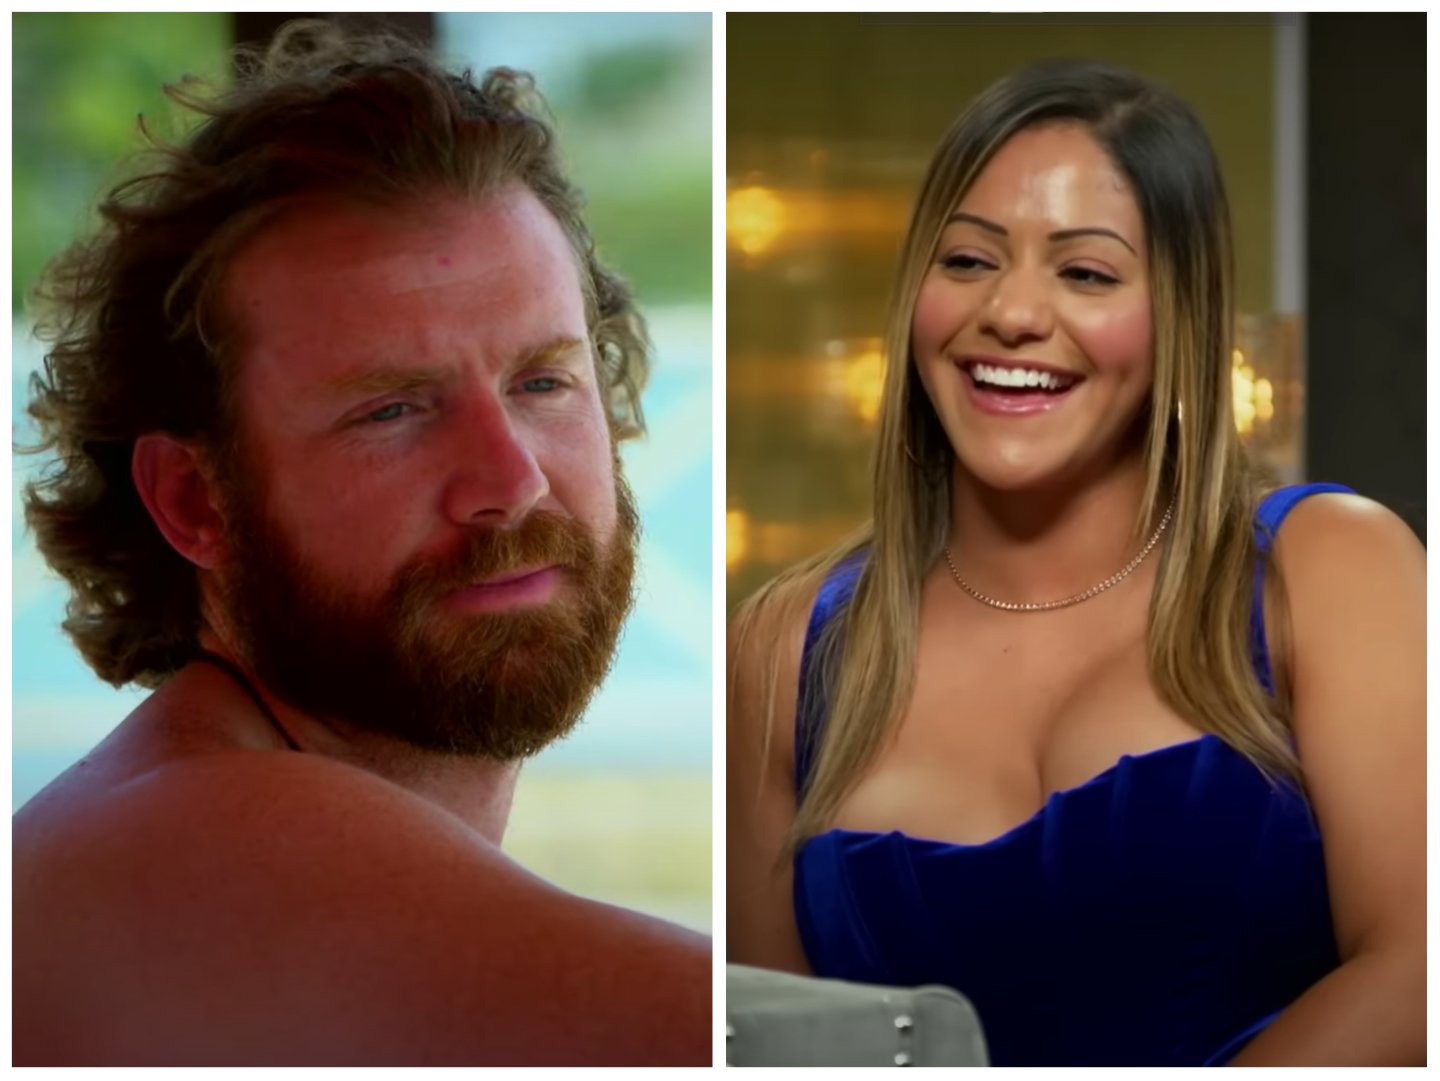 Side by side images of Clint and Domynique from 'Married at First Sight' Season 16